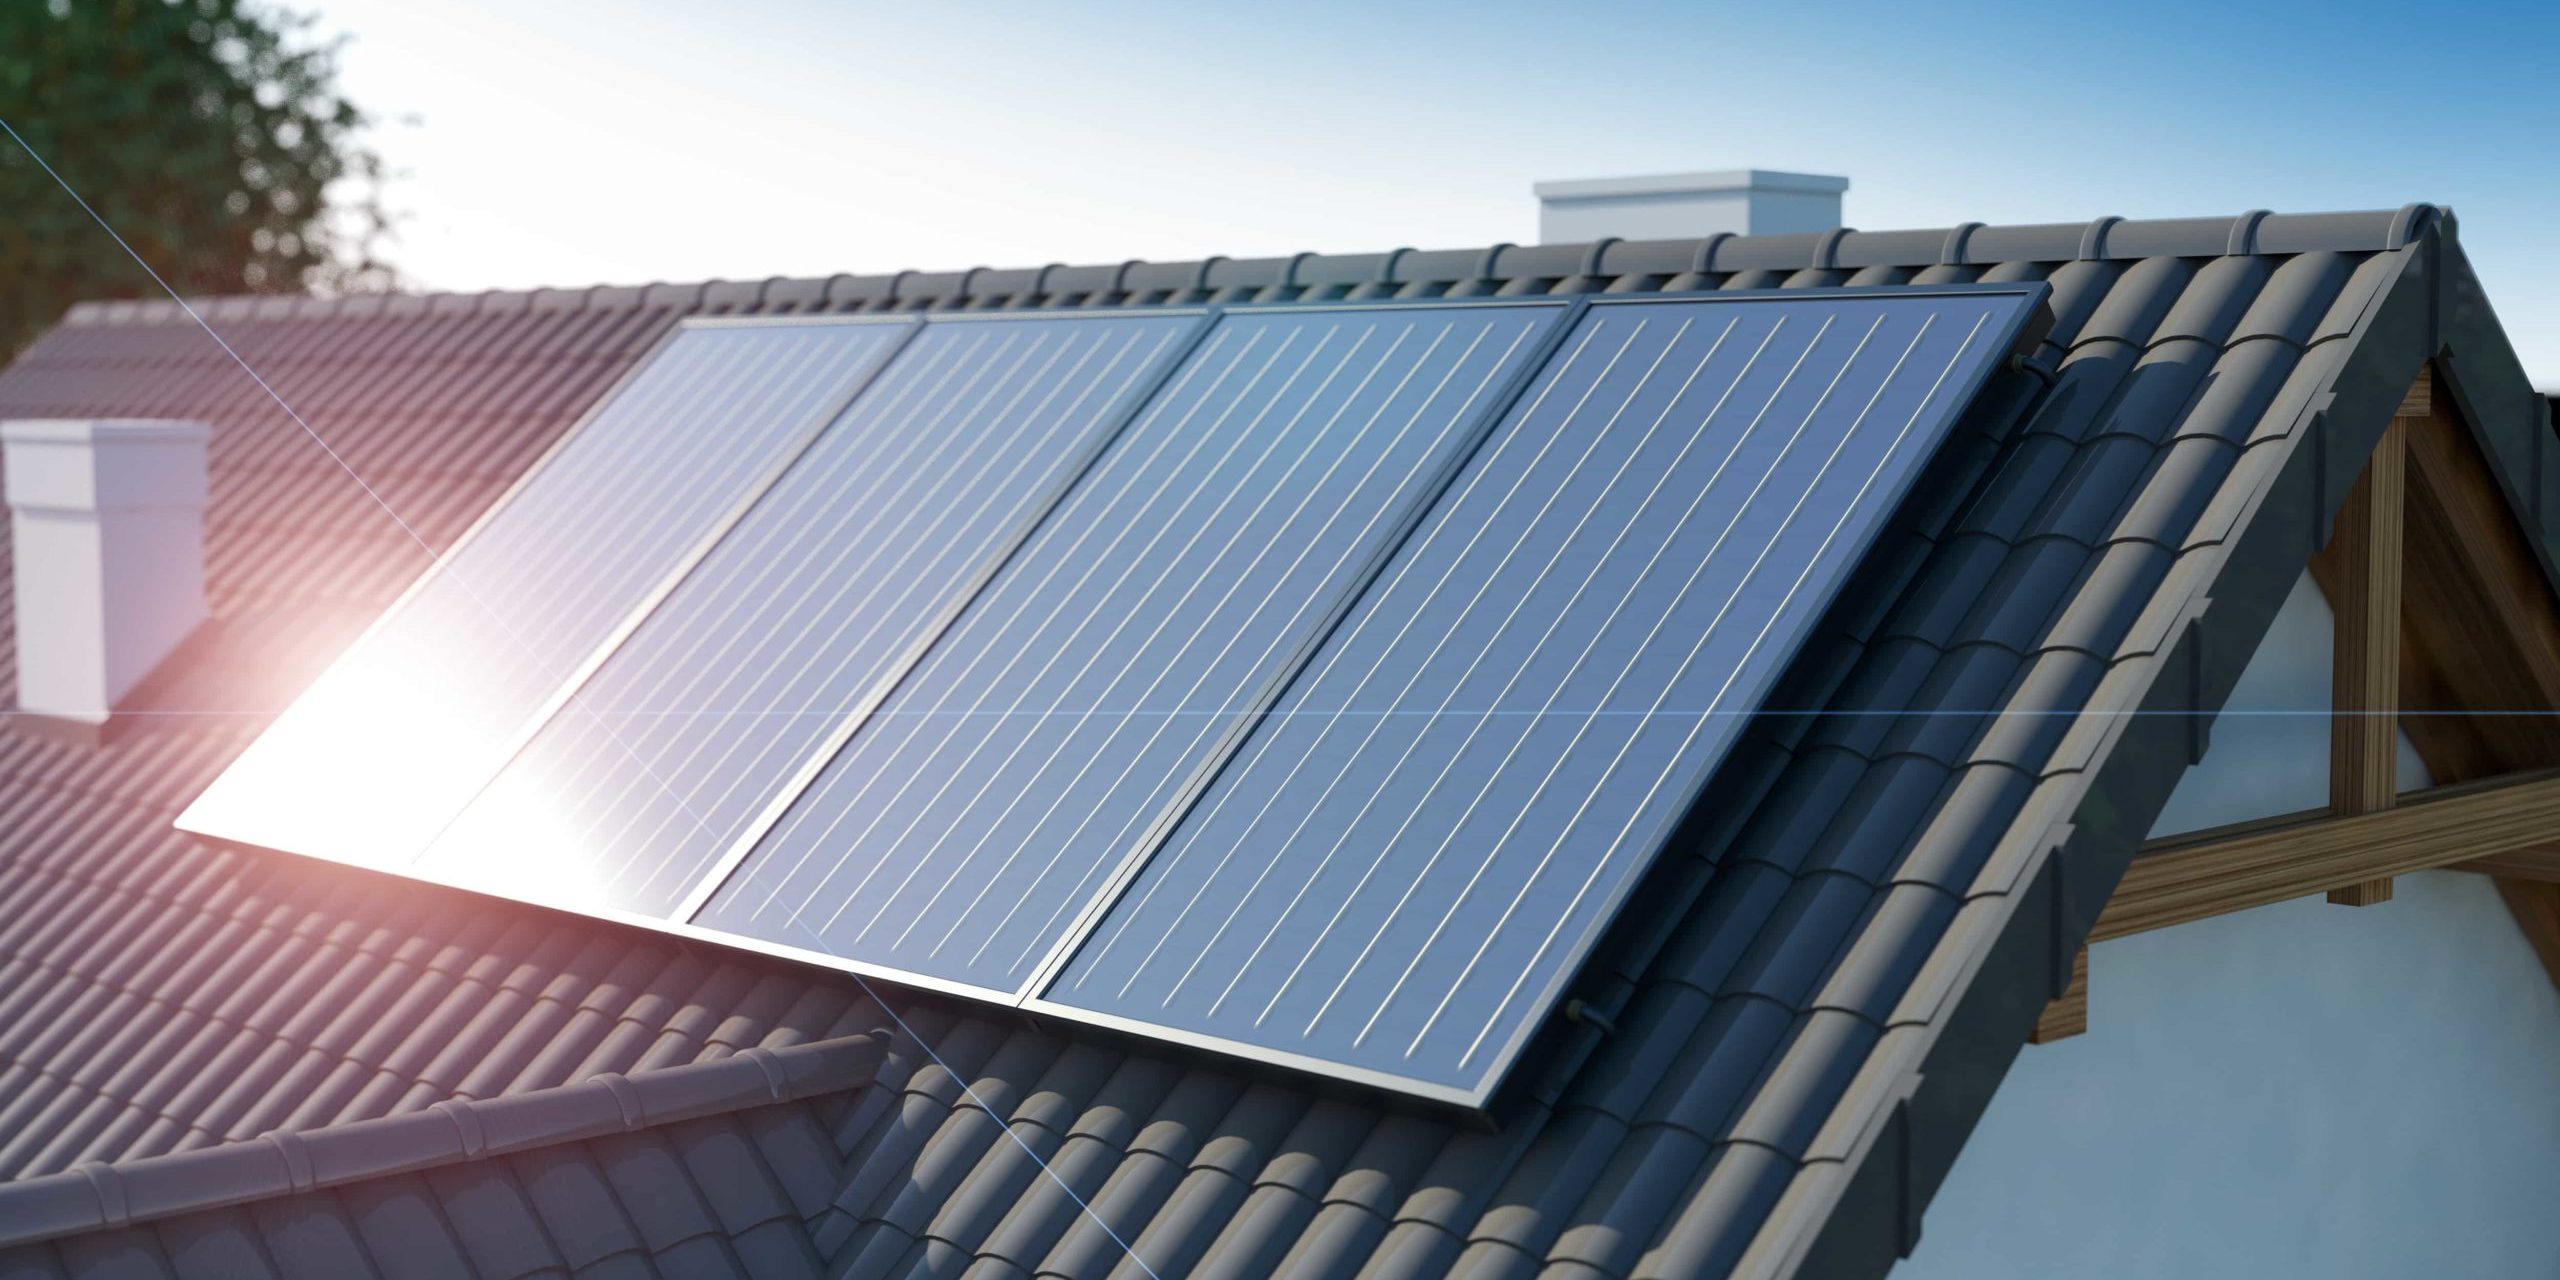 What are the Benefits of Using Floating Solar Systems for your Home and Business Needs